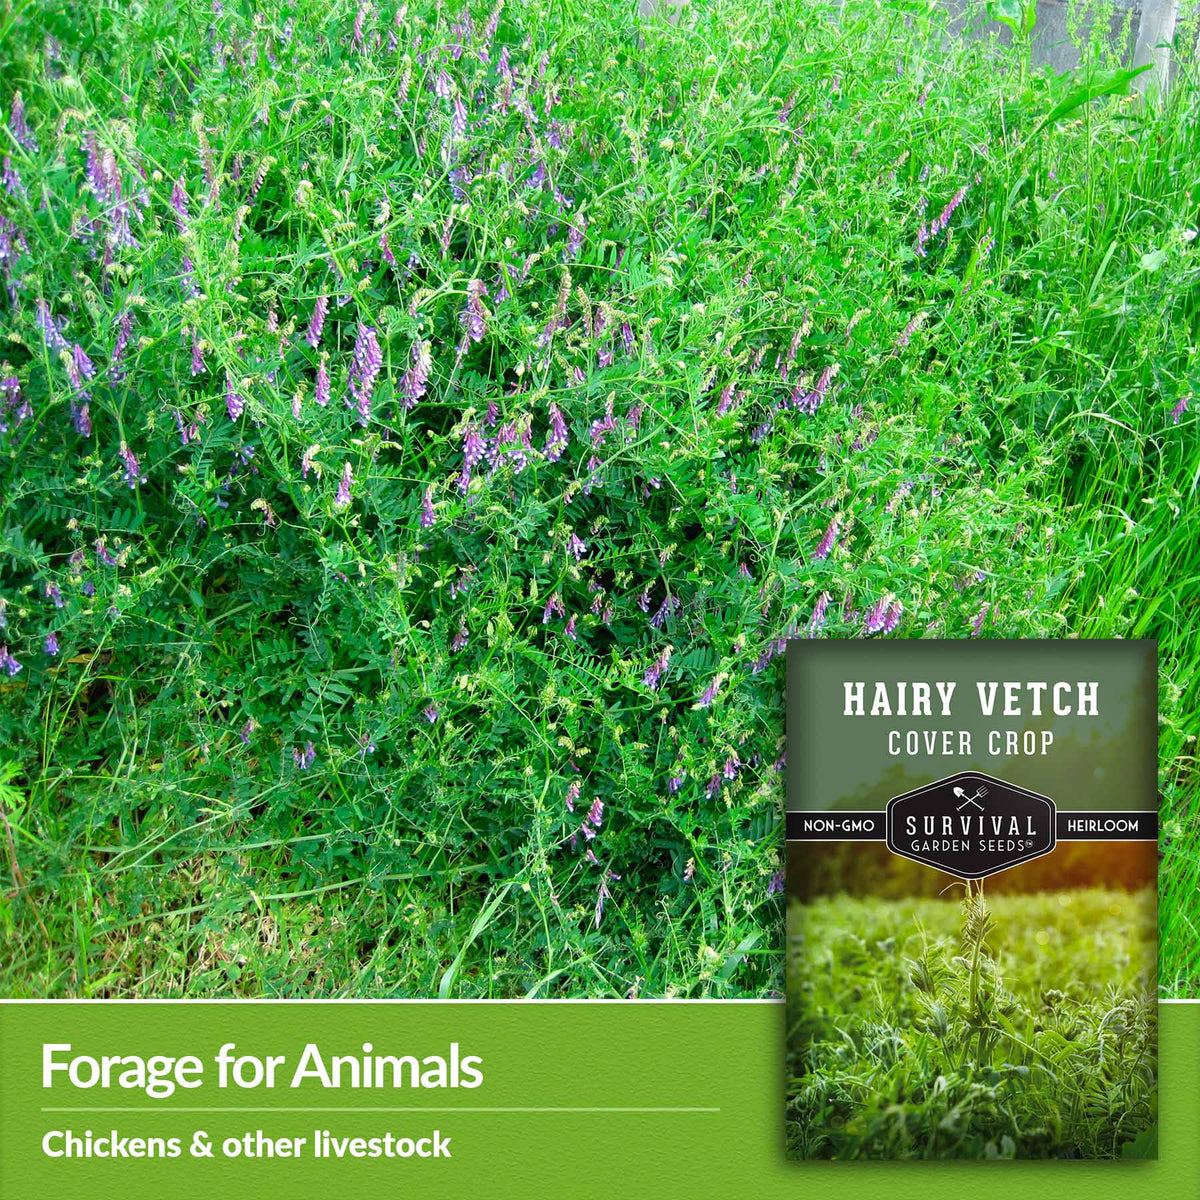 Forage for animals - chickens and other livestock